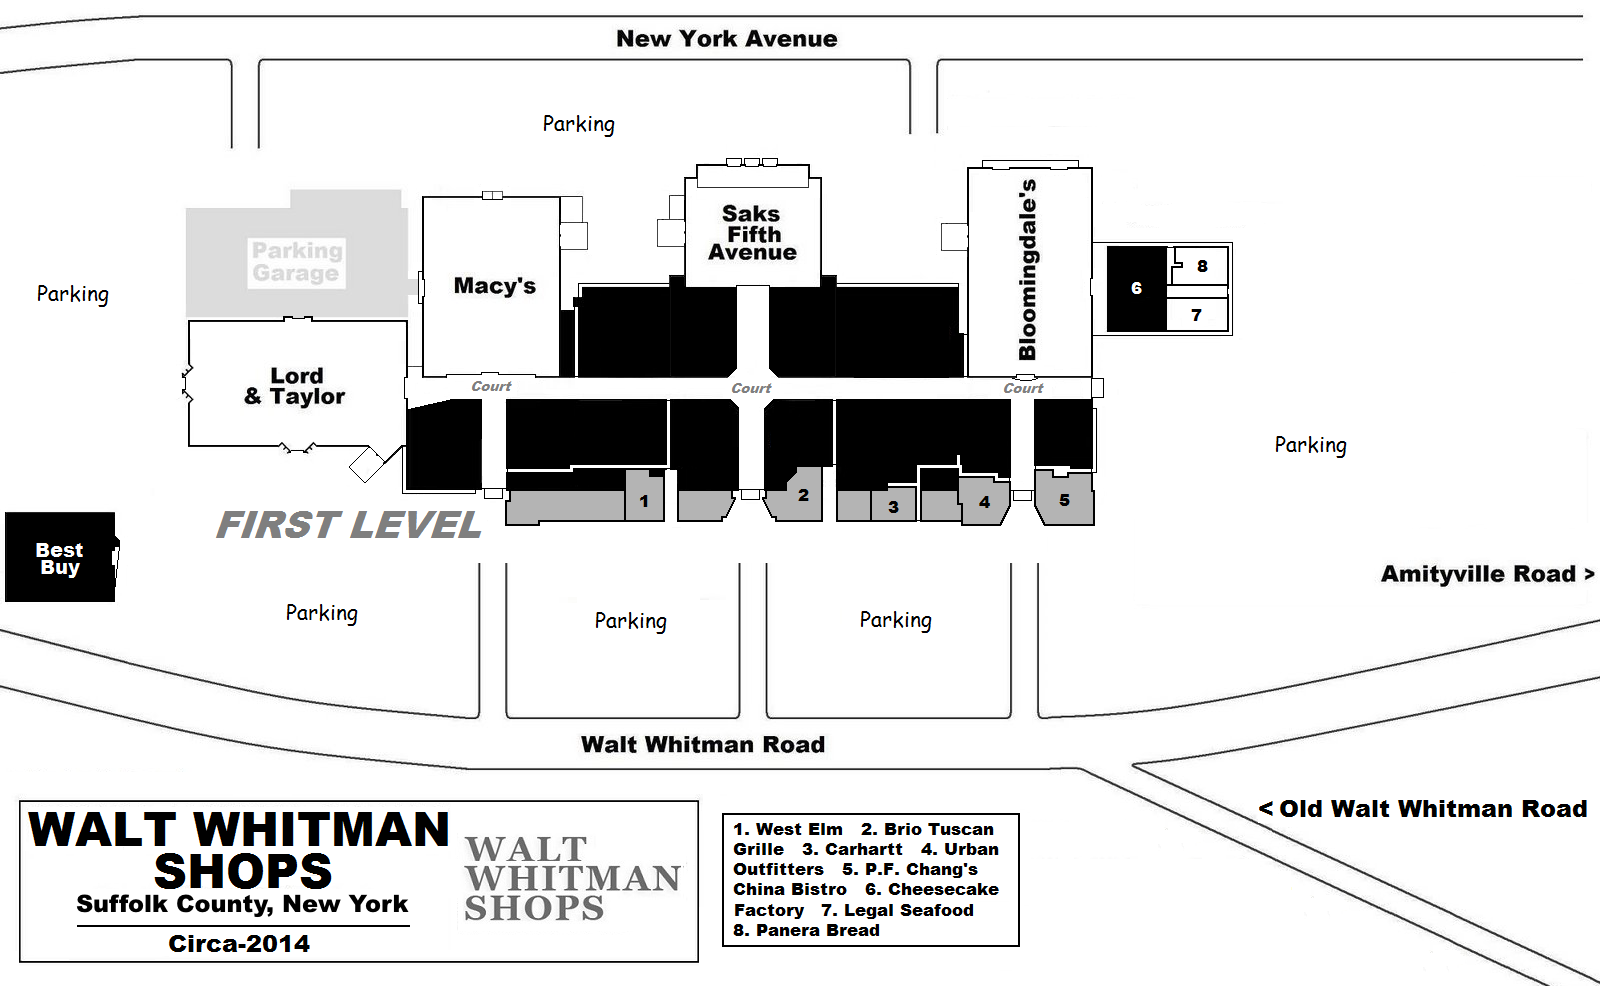 A Visit to the Walt Whitman Mall